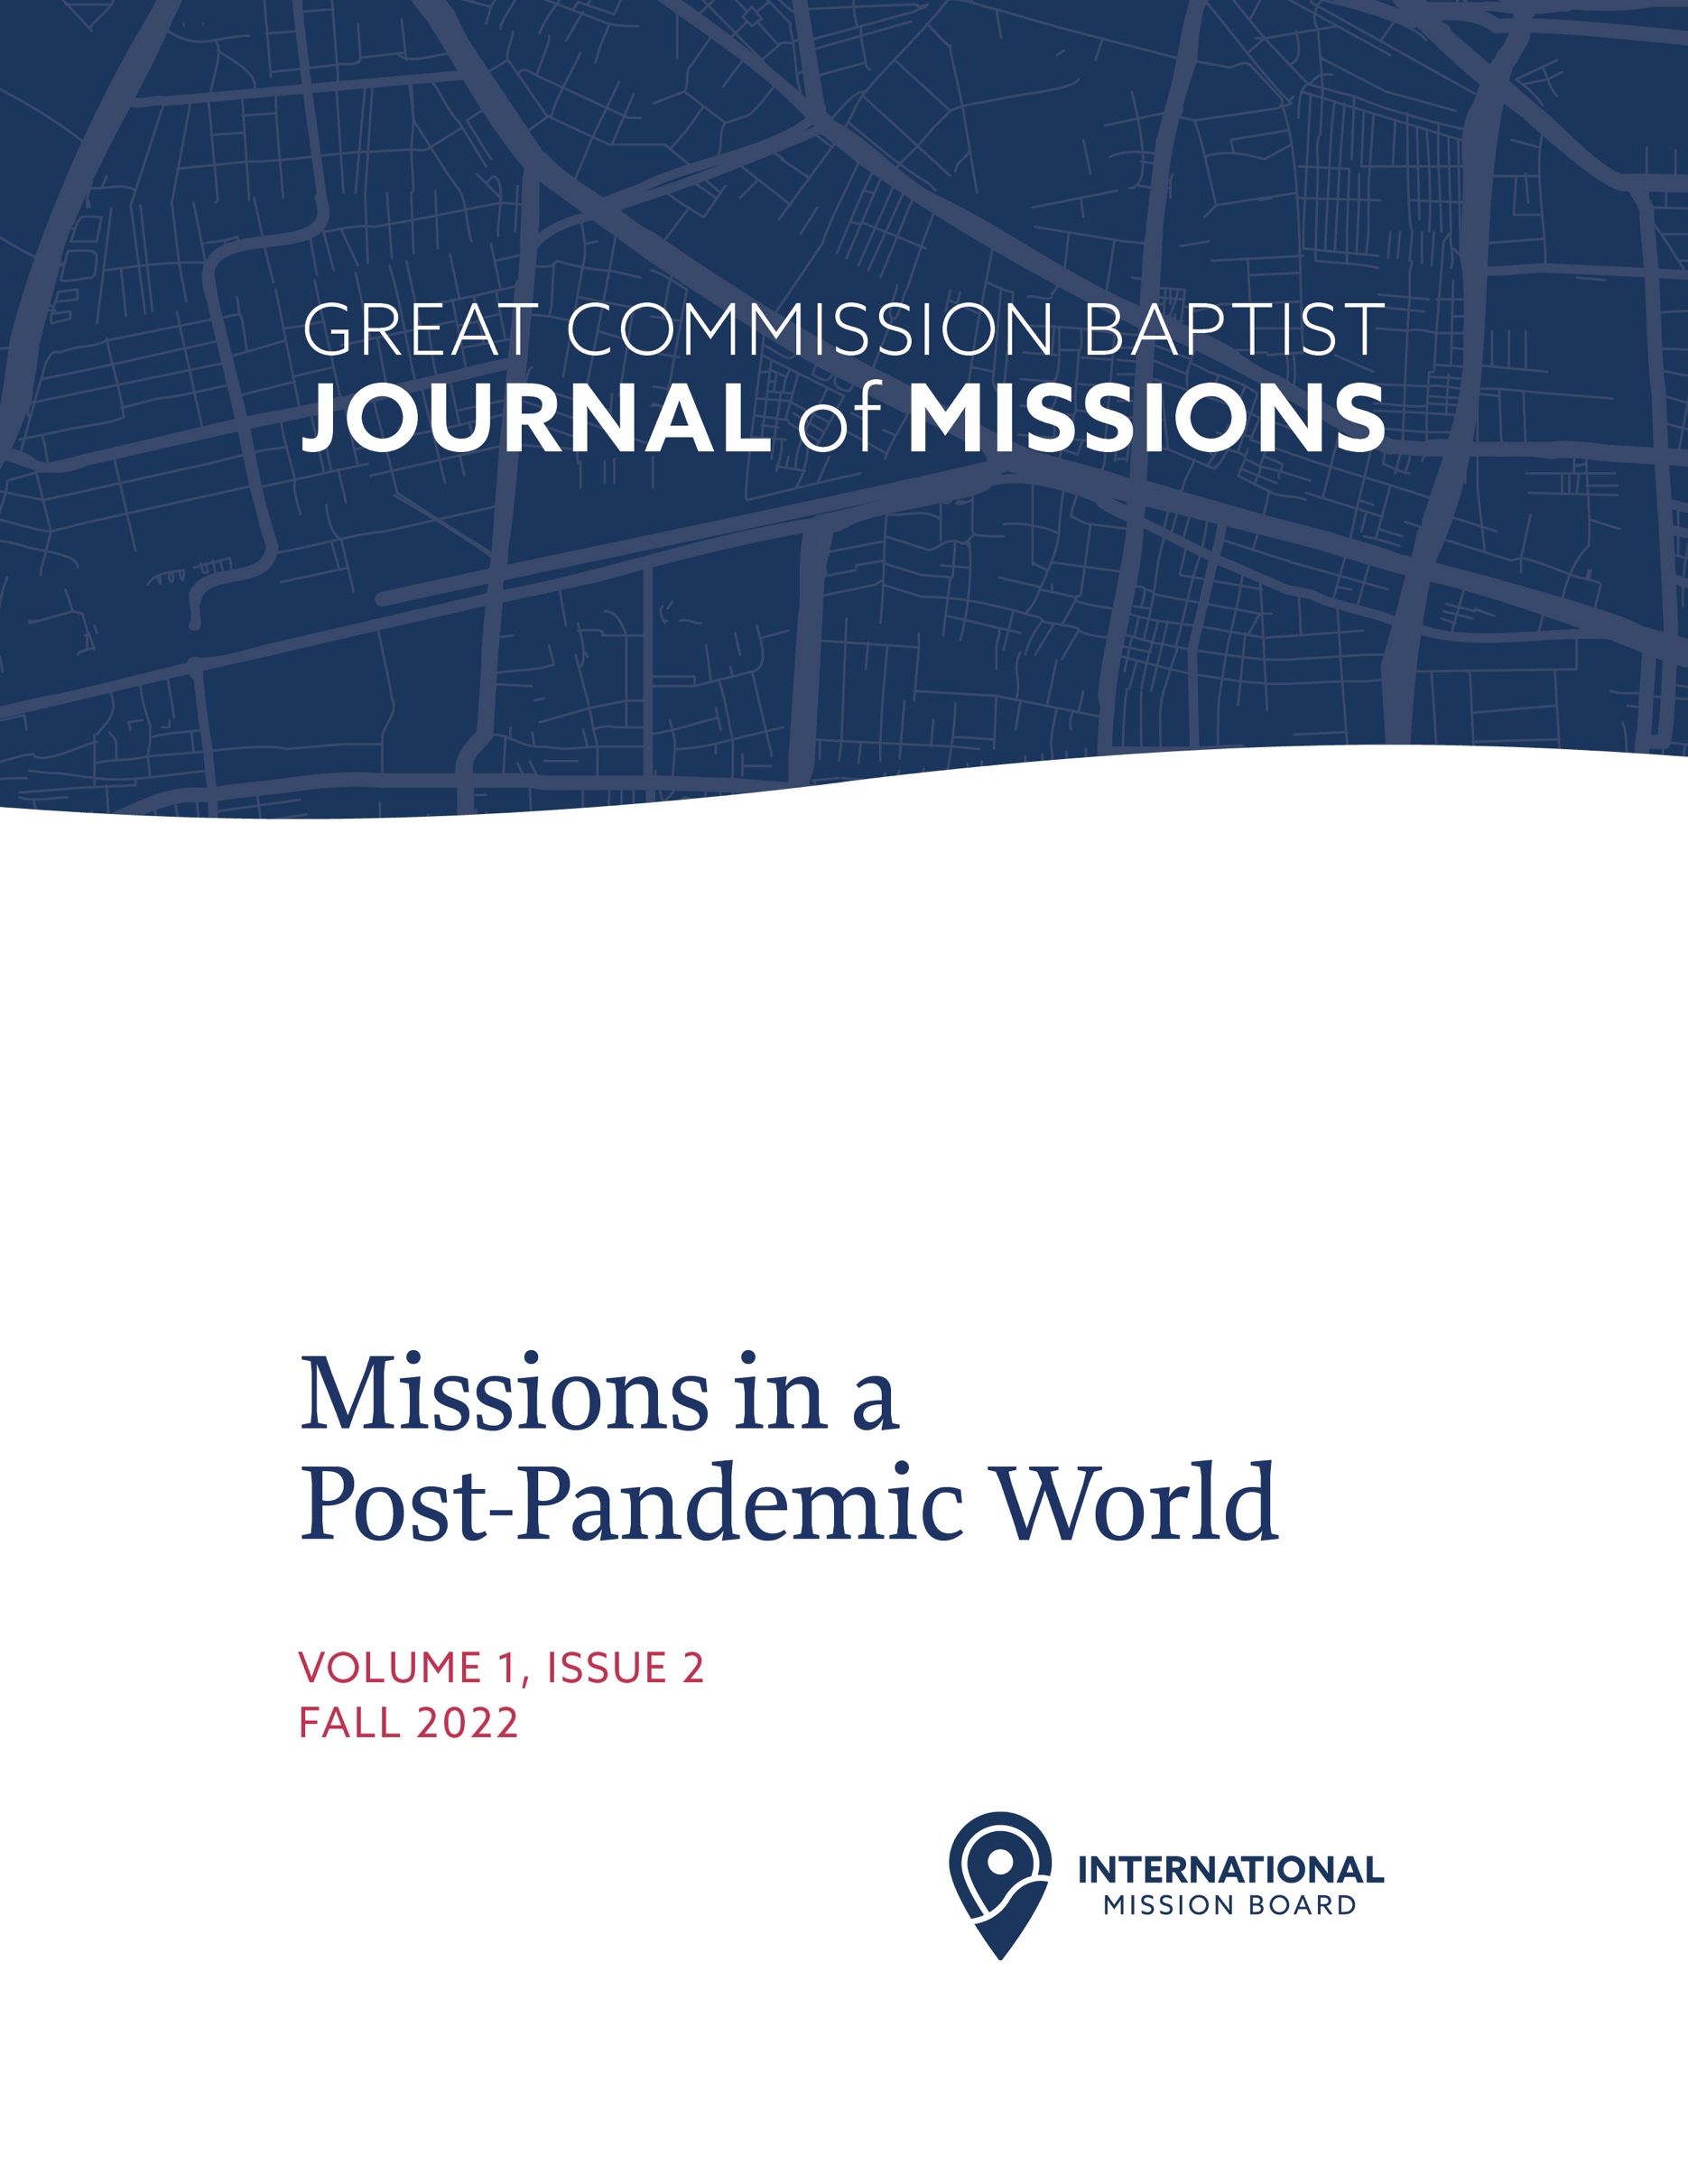 Cover image for "Missions in a Post-Pandemic World," GCBJM Volume 1, Issue 2 (Fall 2022)